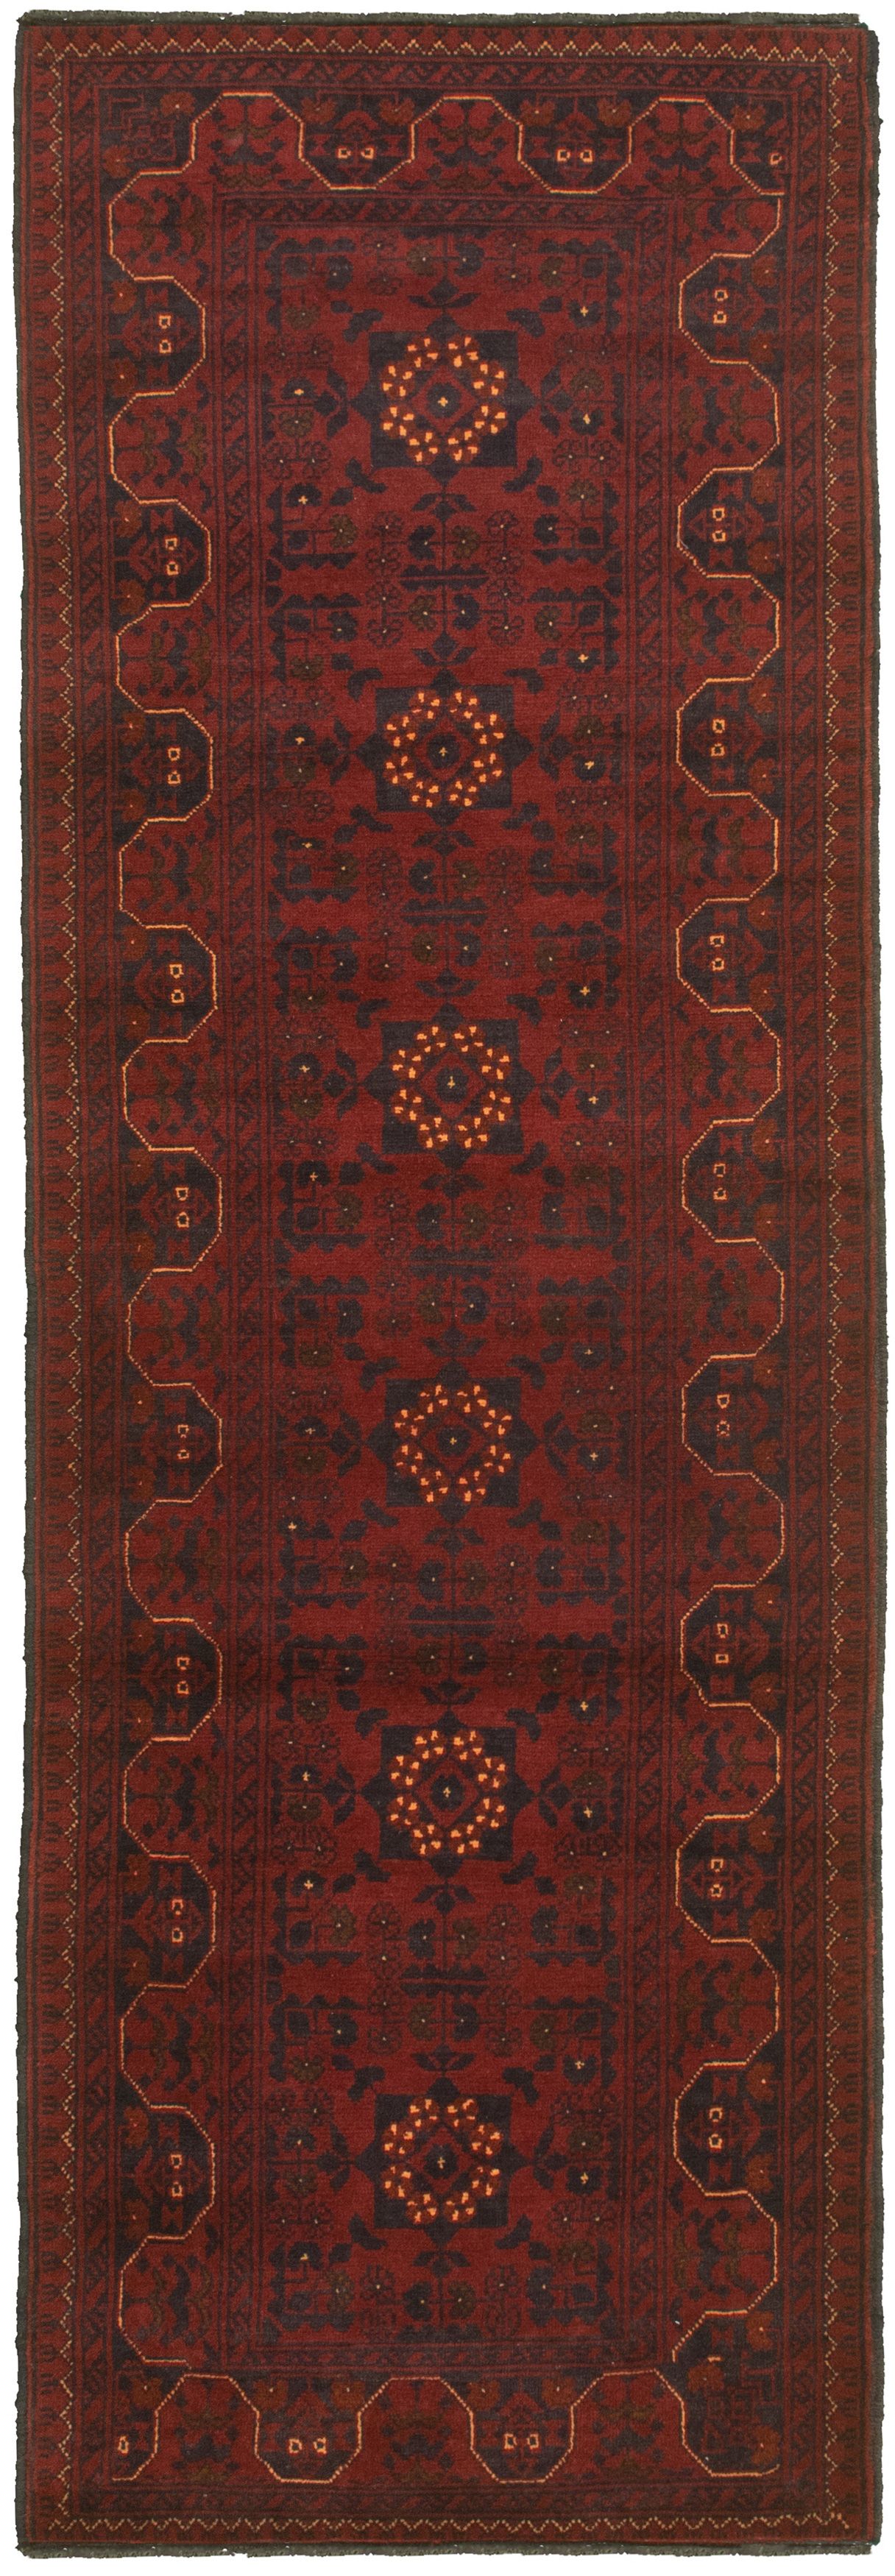 Hand-knotted Finest Khal Mohammadi Dark Red  Rug 2'11" x 9'5" Size: 2'11" x 9'5"  